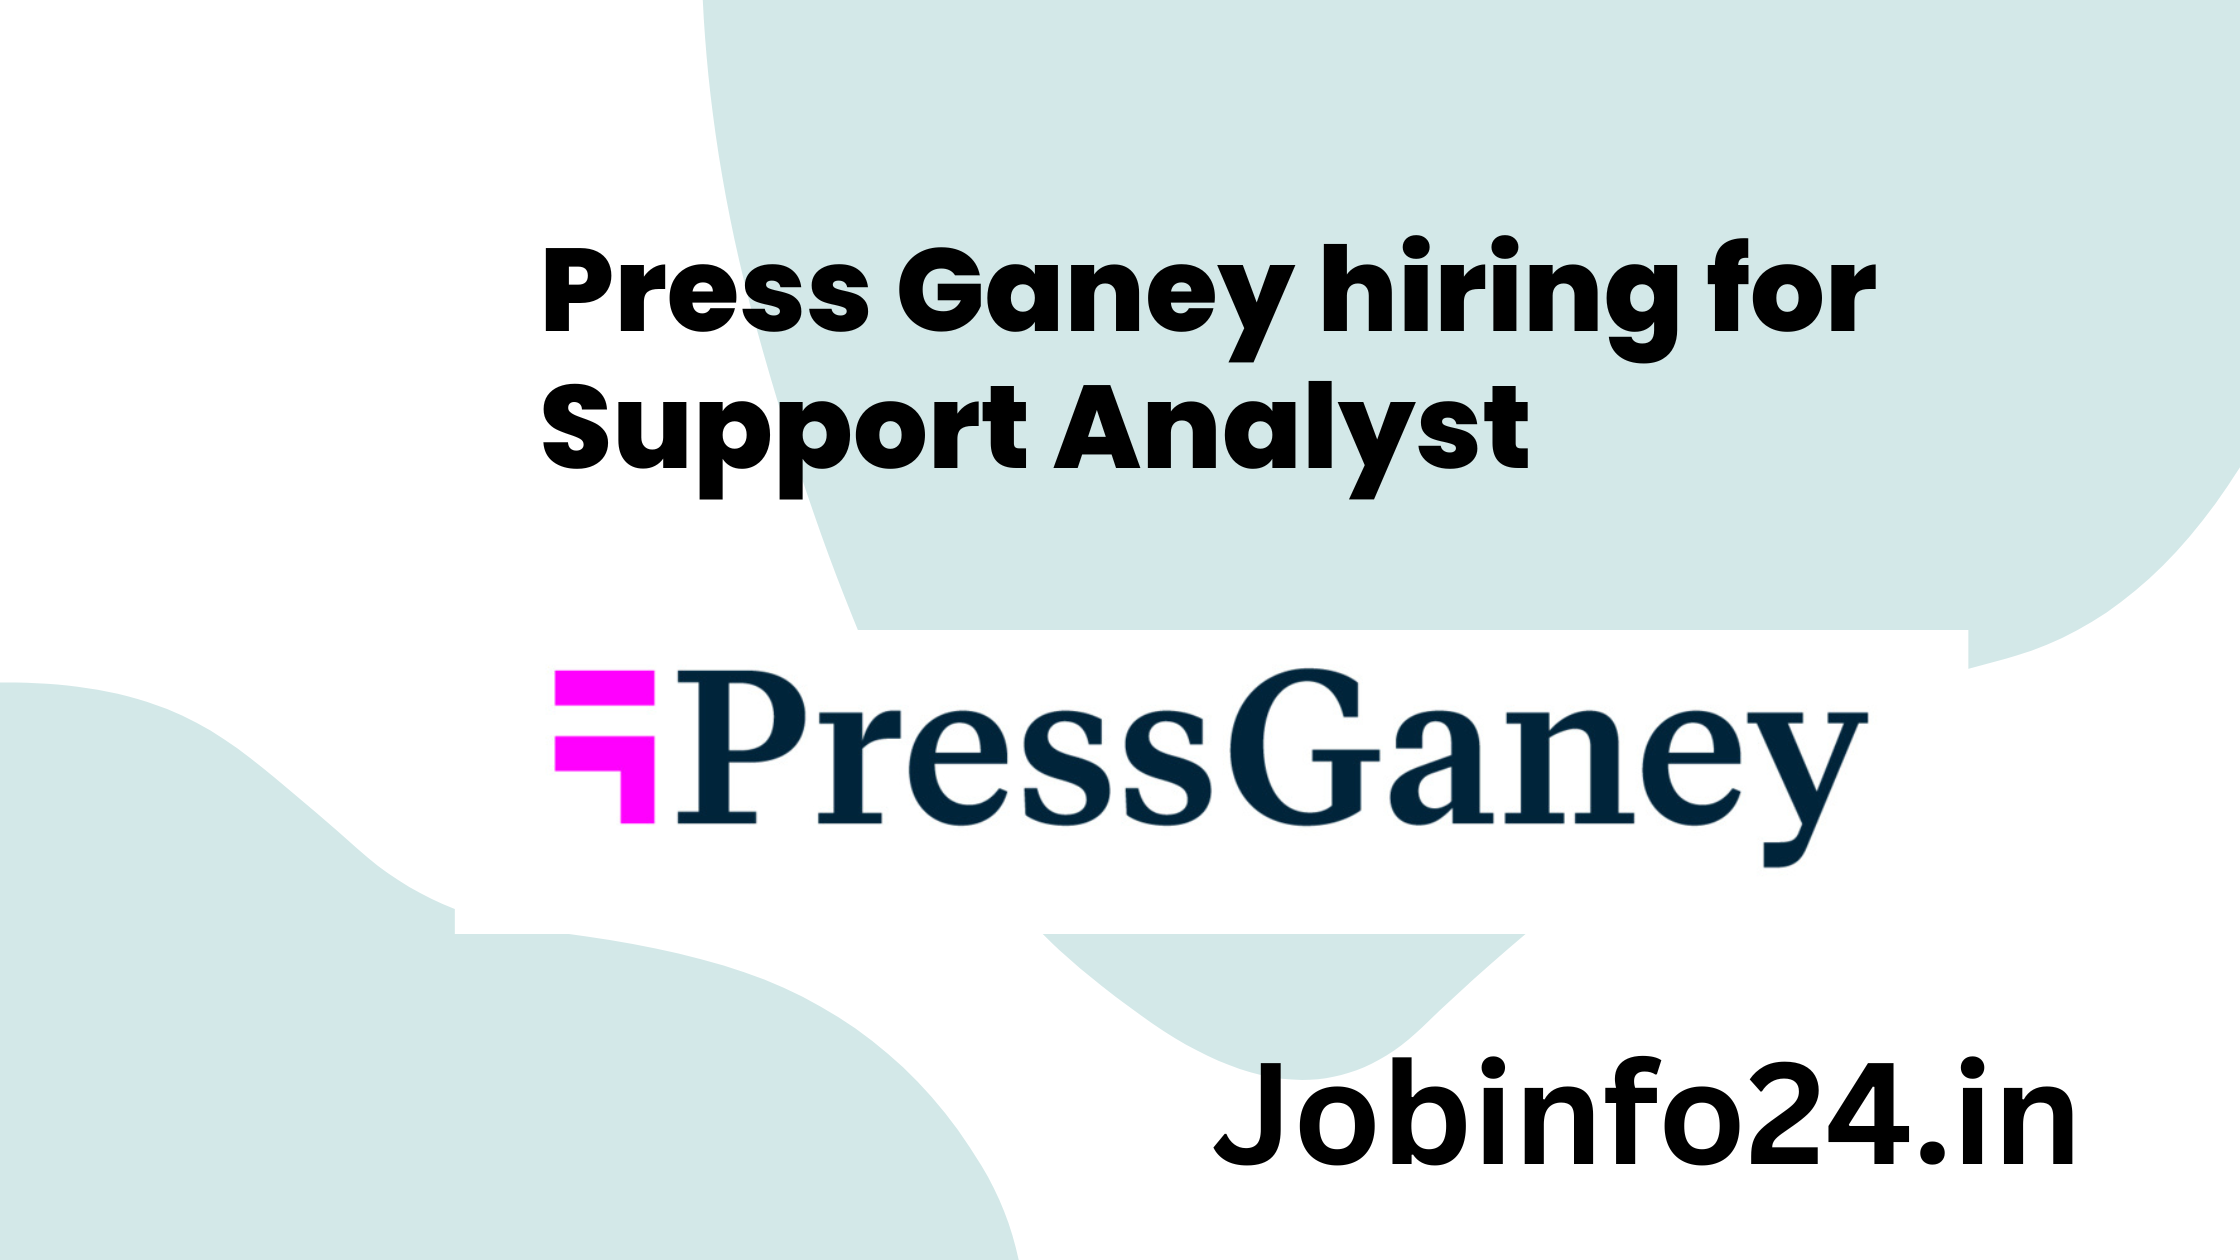 Press Ganey hiring for Support Analyst 